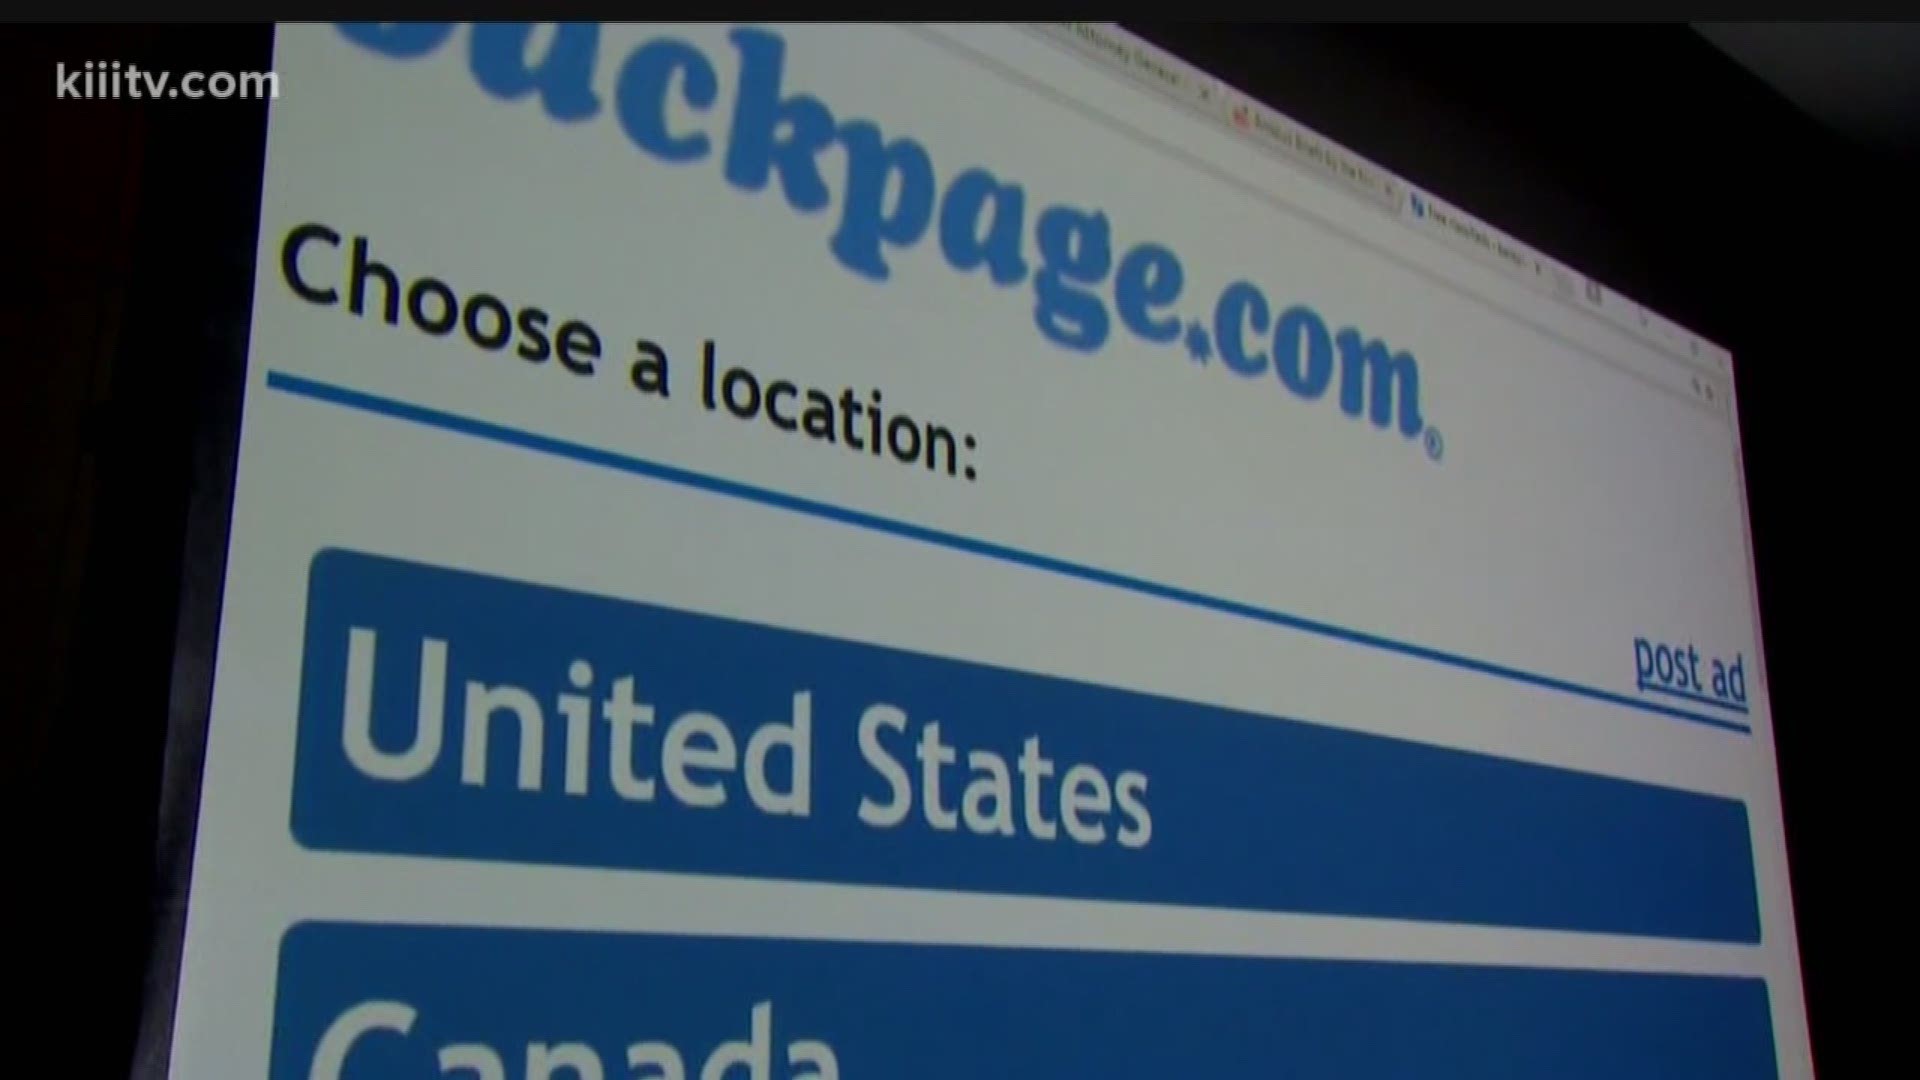 blarny stone recommends backpage com ft worth pic